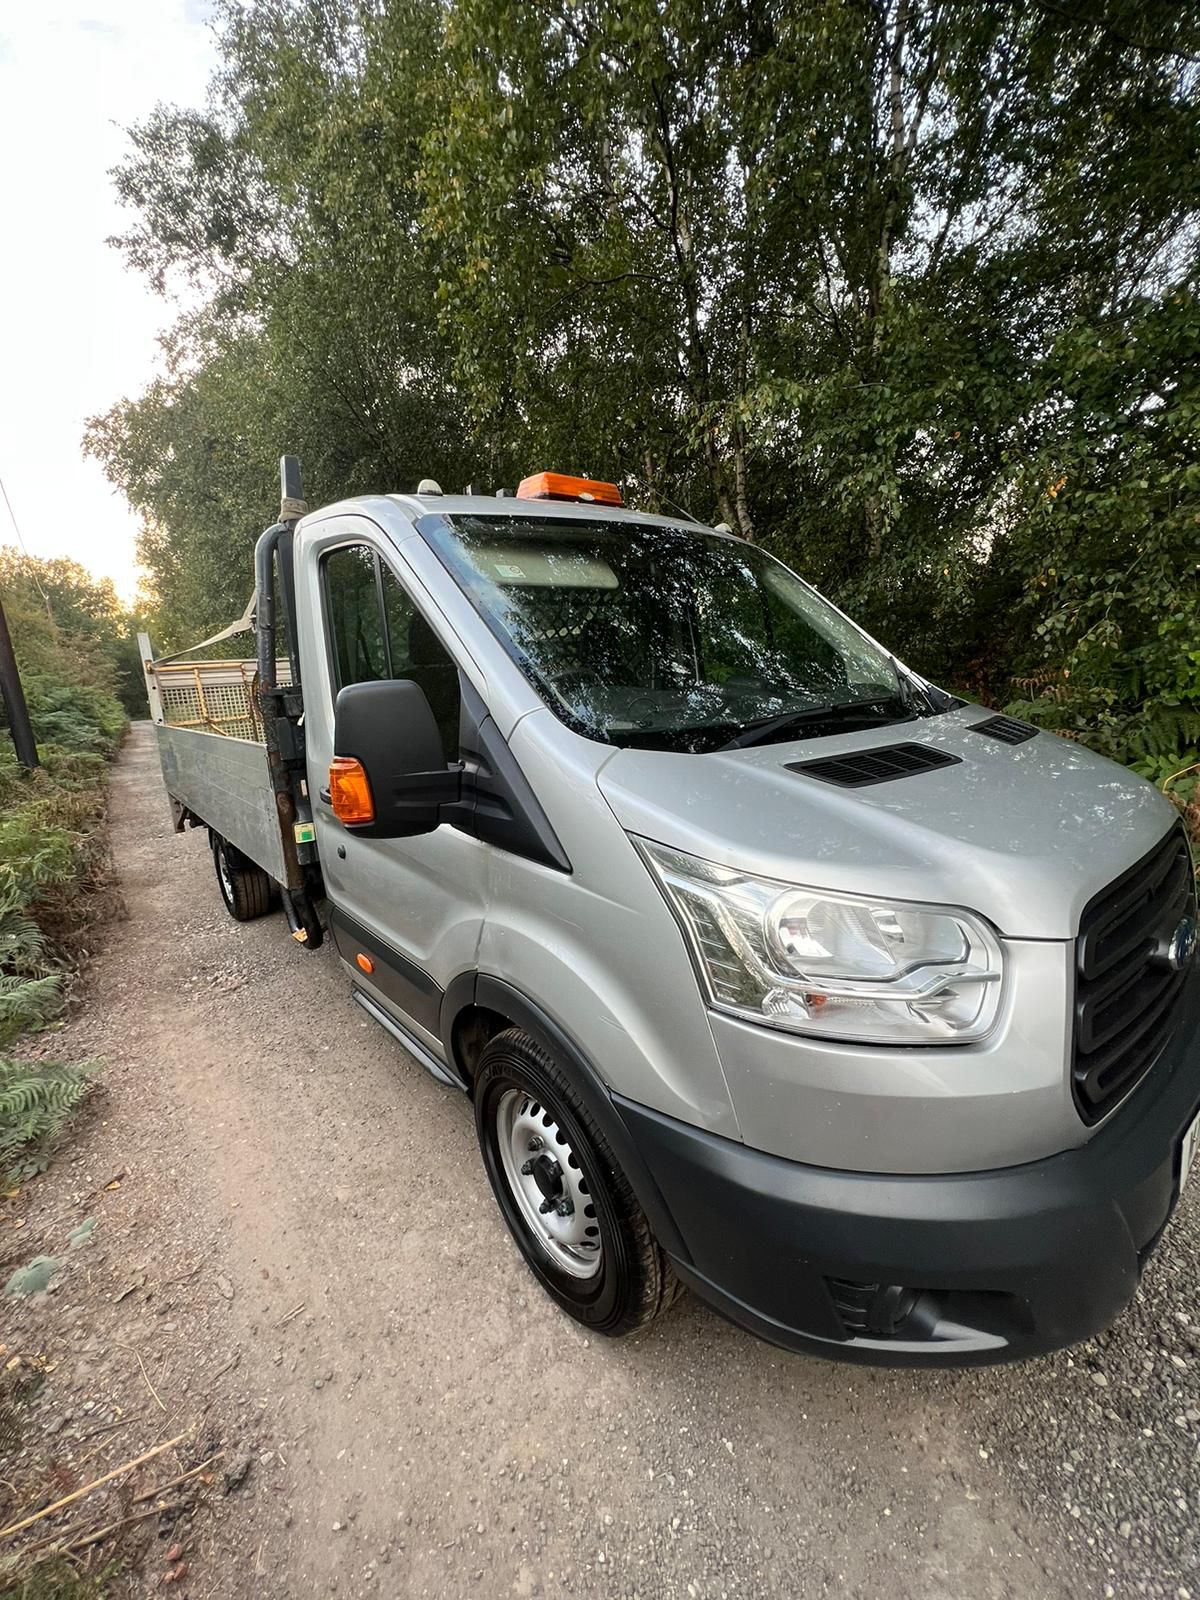 Bid on FORD TRANSIT 2016 FLATBED WITH TAIL LIFT 14 FT DROPSIDE BODY- Buy &amp; Sell on Auction with EAMA Group